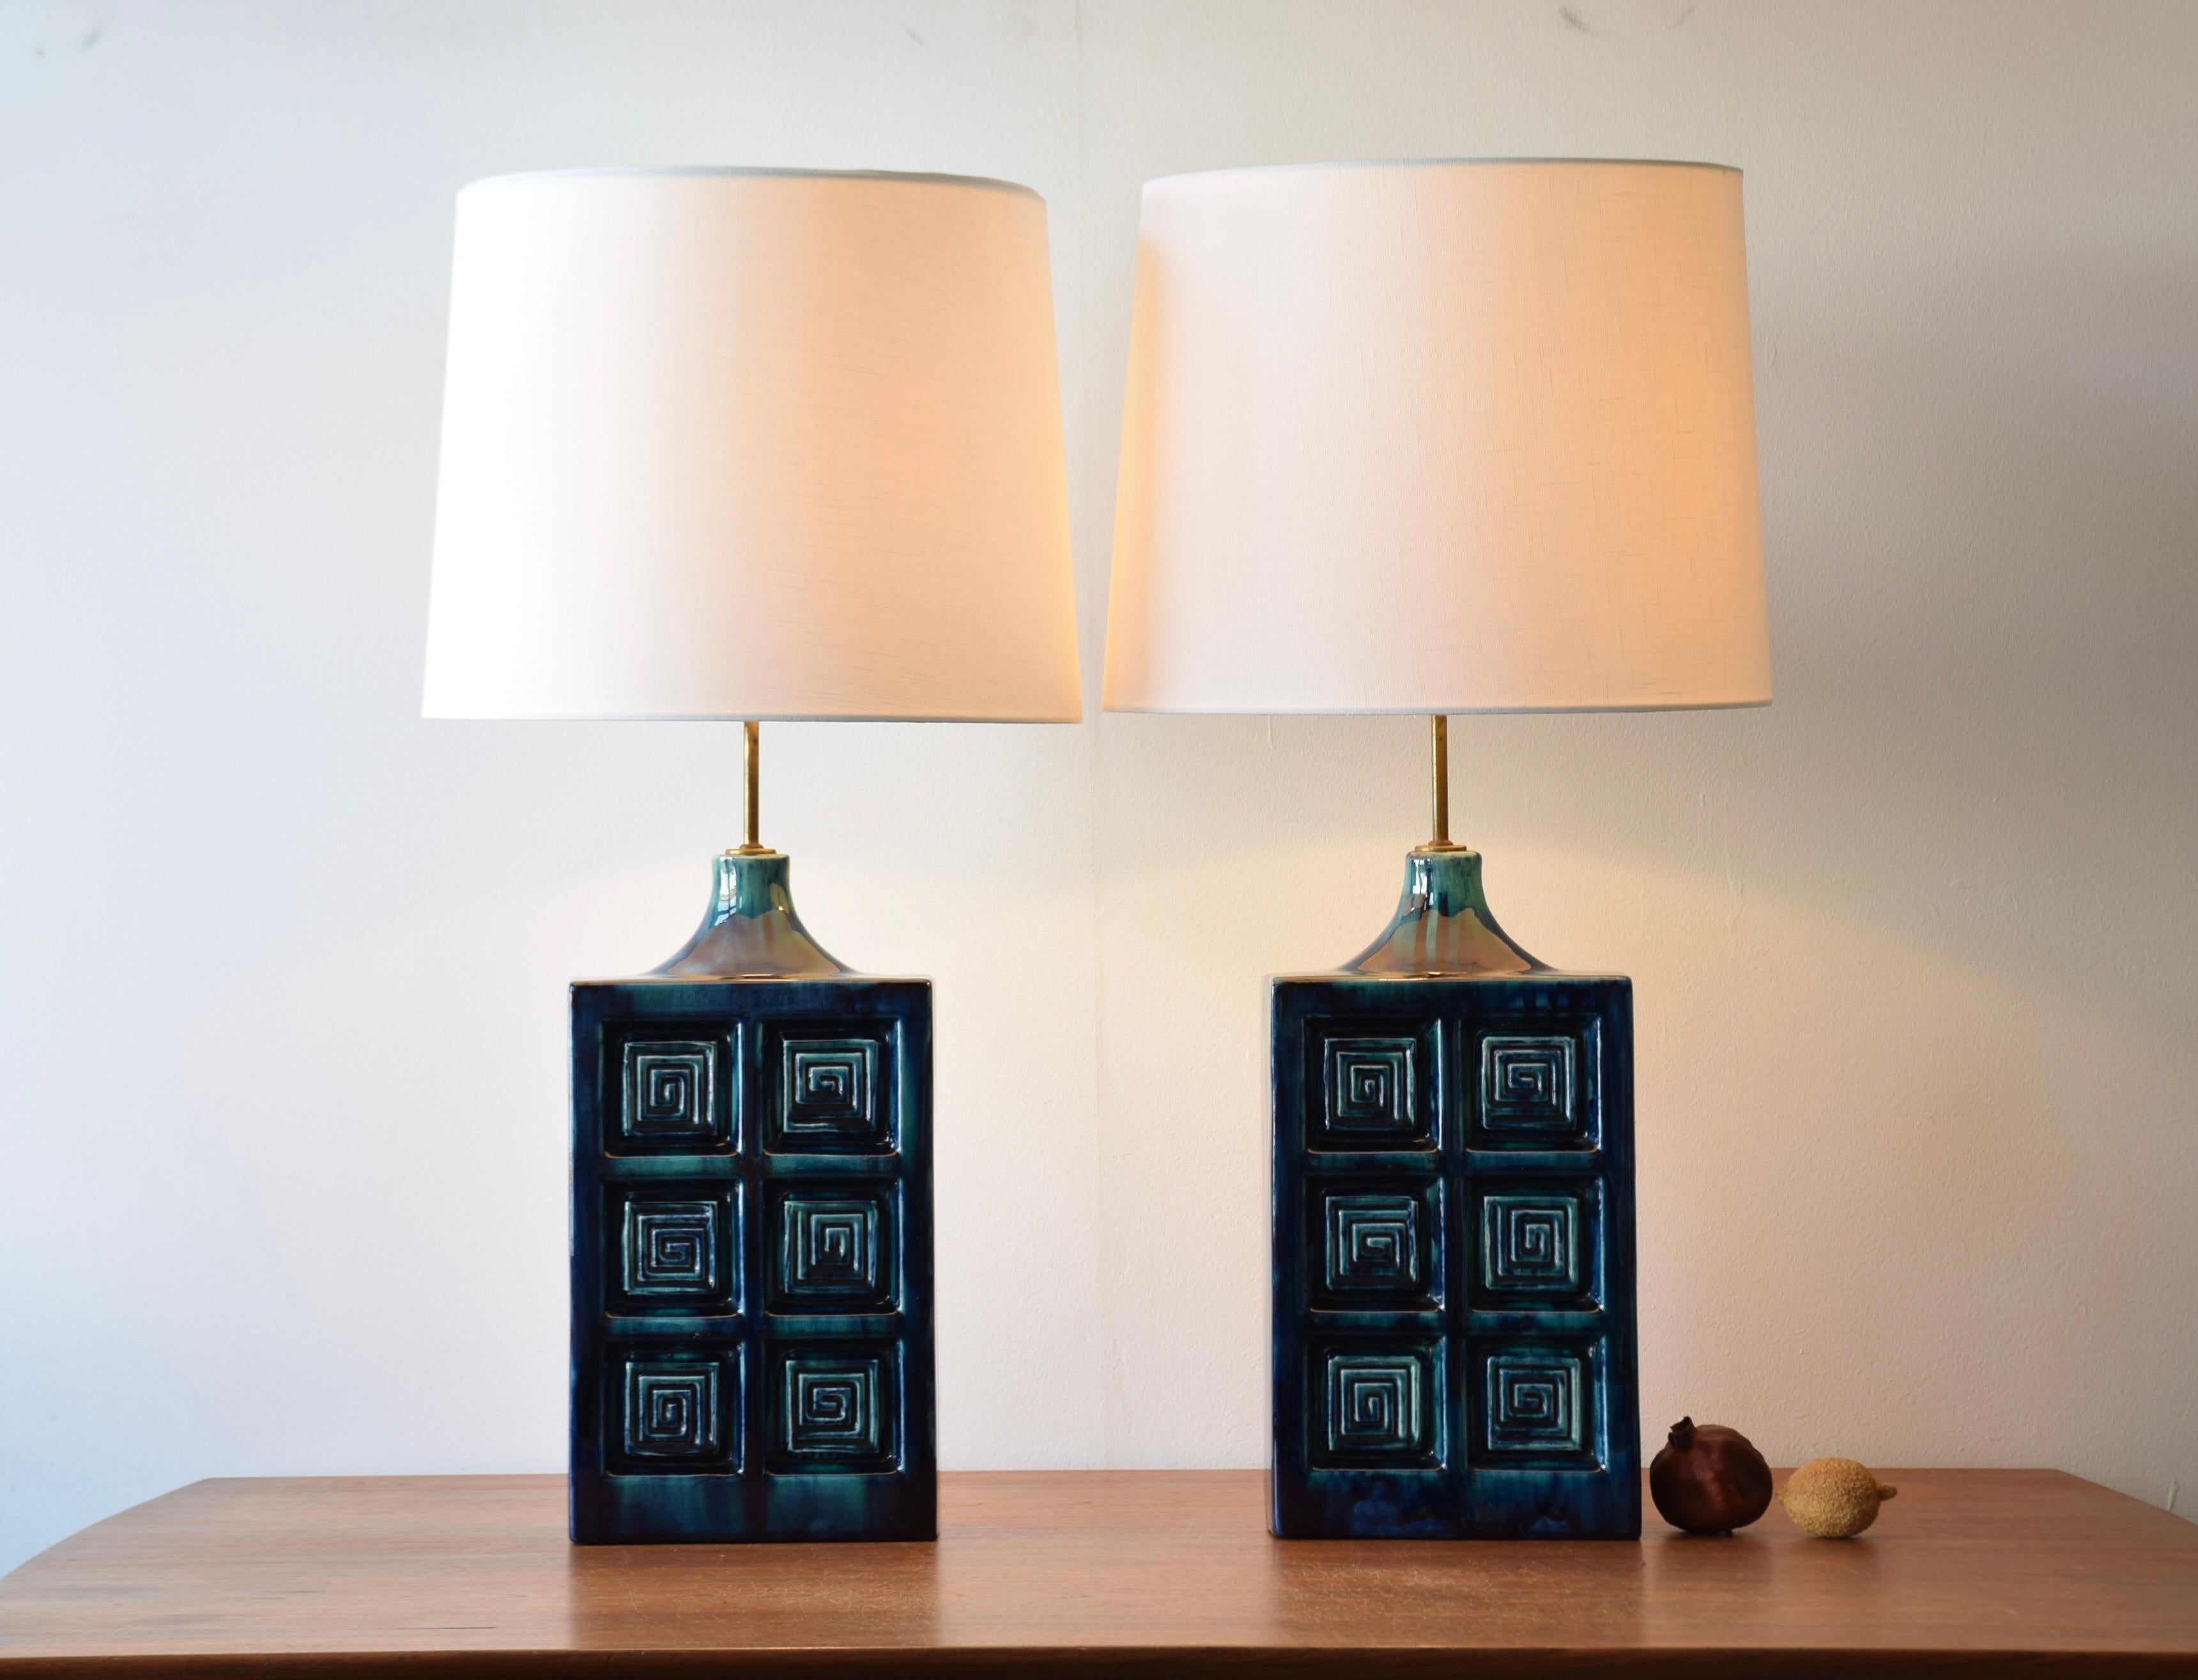 Pair of huge Midcentury Danish table lamps from the ceramic workshop S. Holstein. Manufactured circa 1960s.

The glaze is vivid with a mix of blue and turquoise. The front is decorated with a repeated geometric decor. On top of the ceramic bases